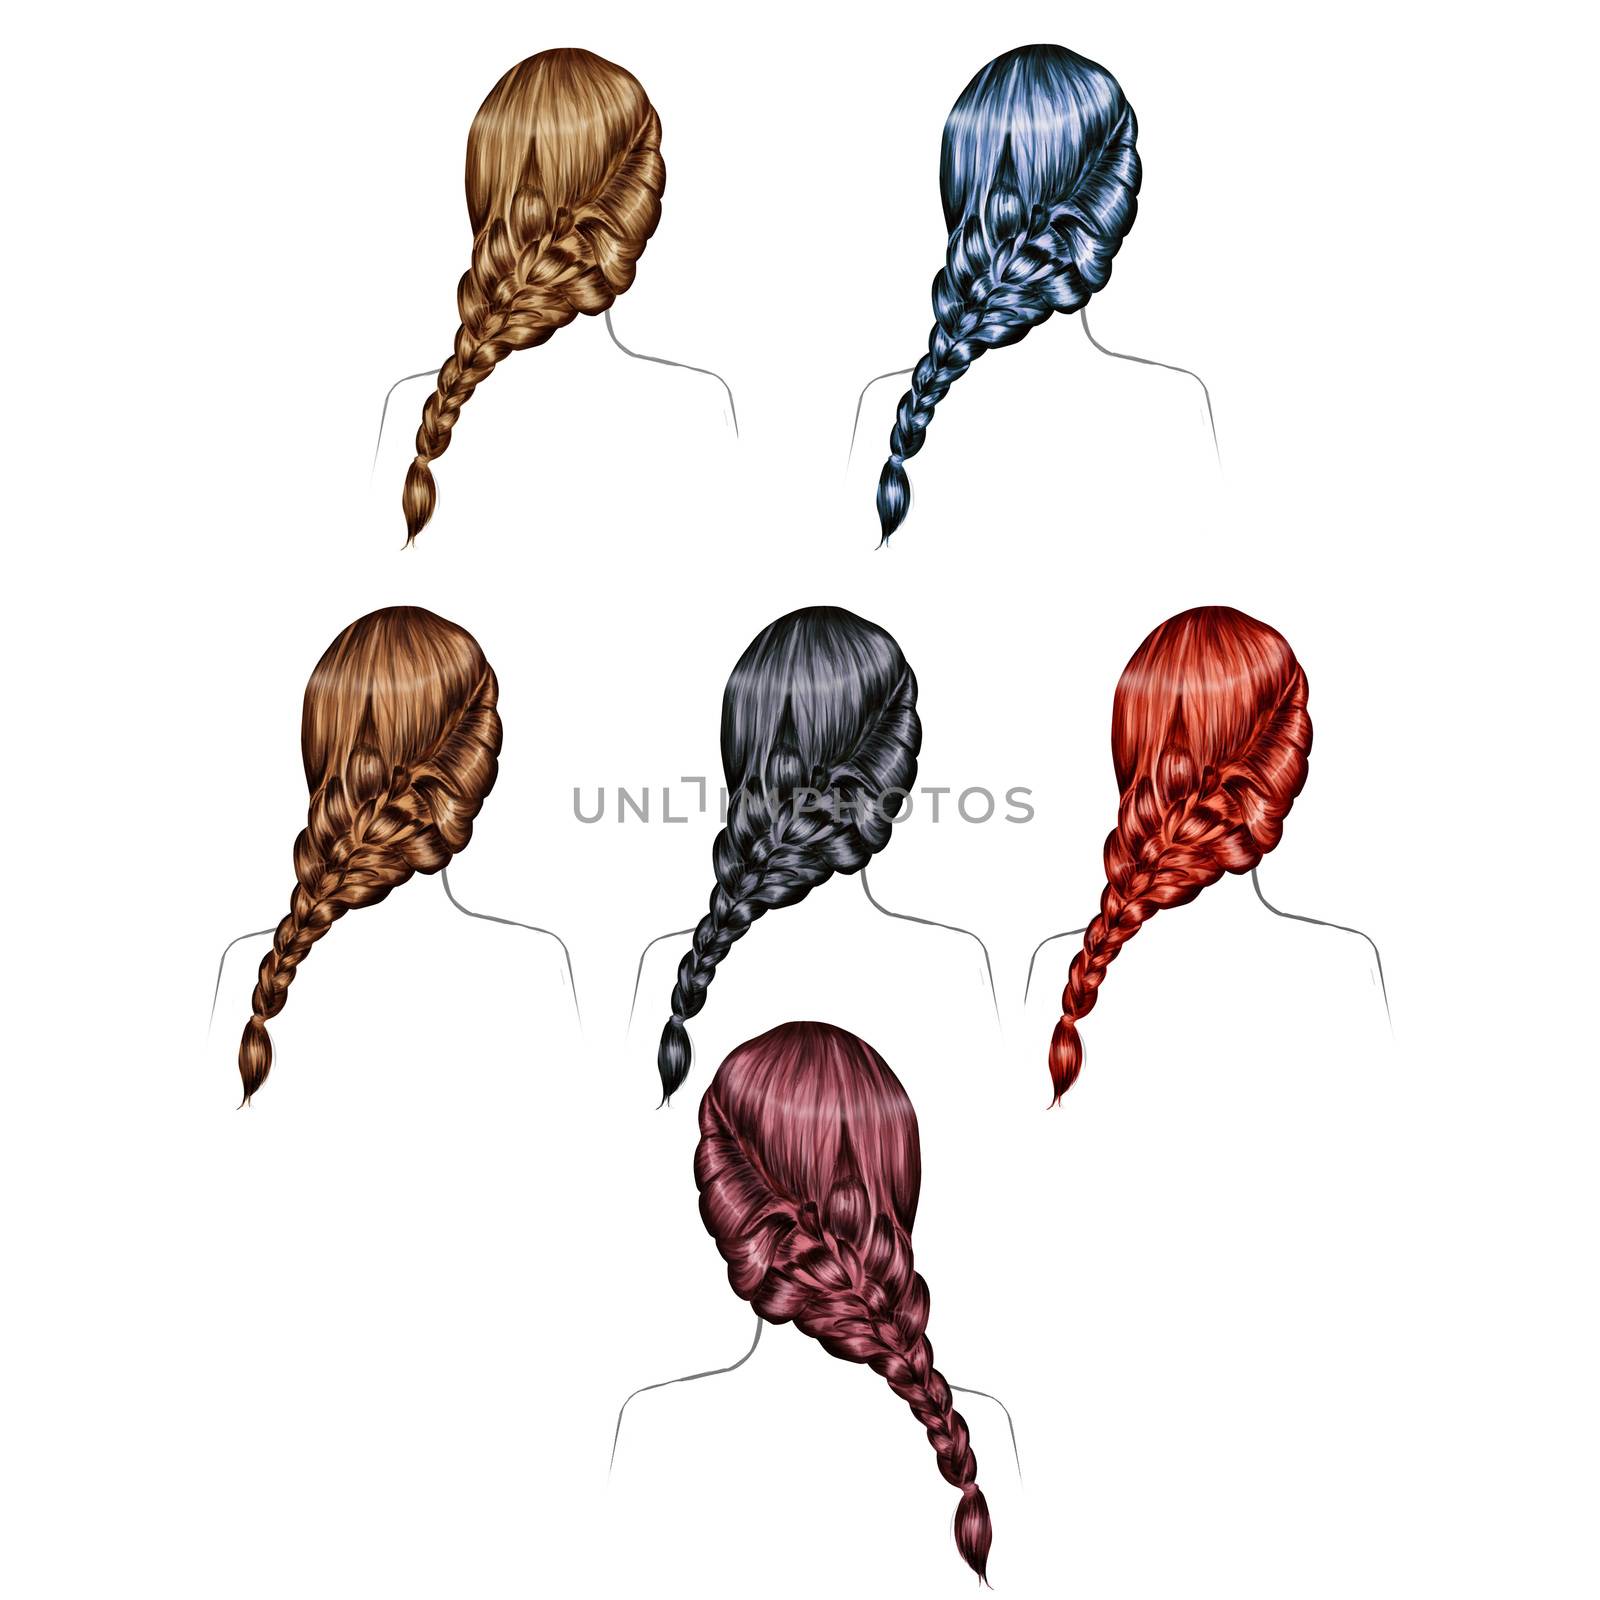 Illustration of woman hairstyles - woman hair - set - collection